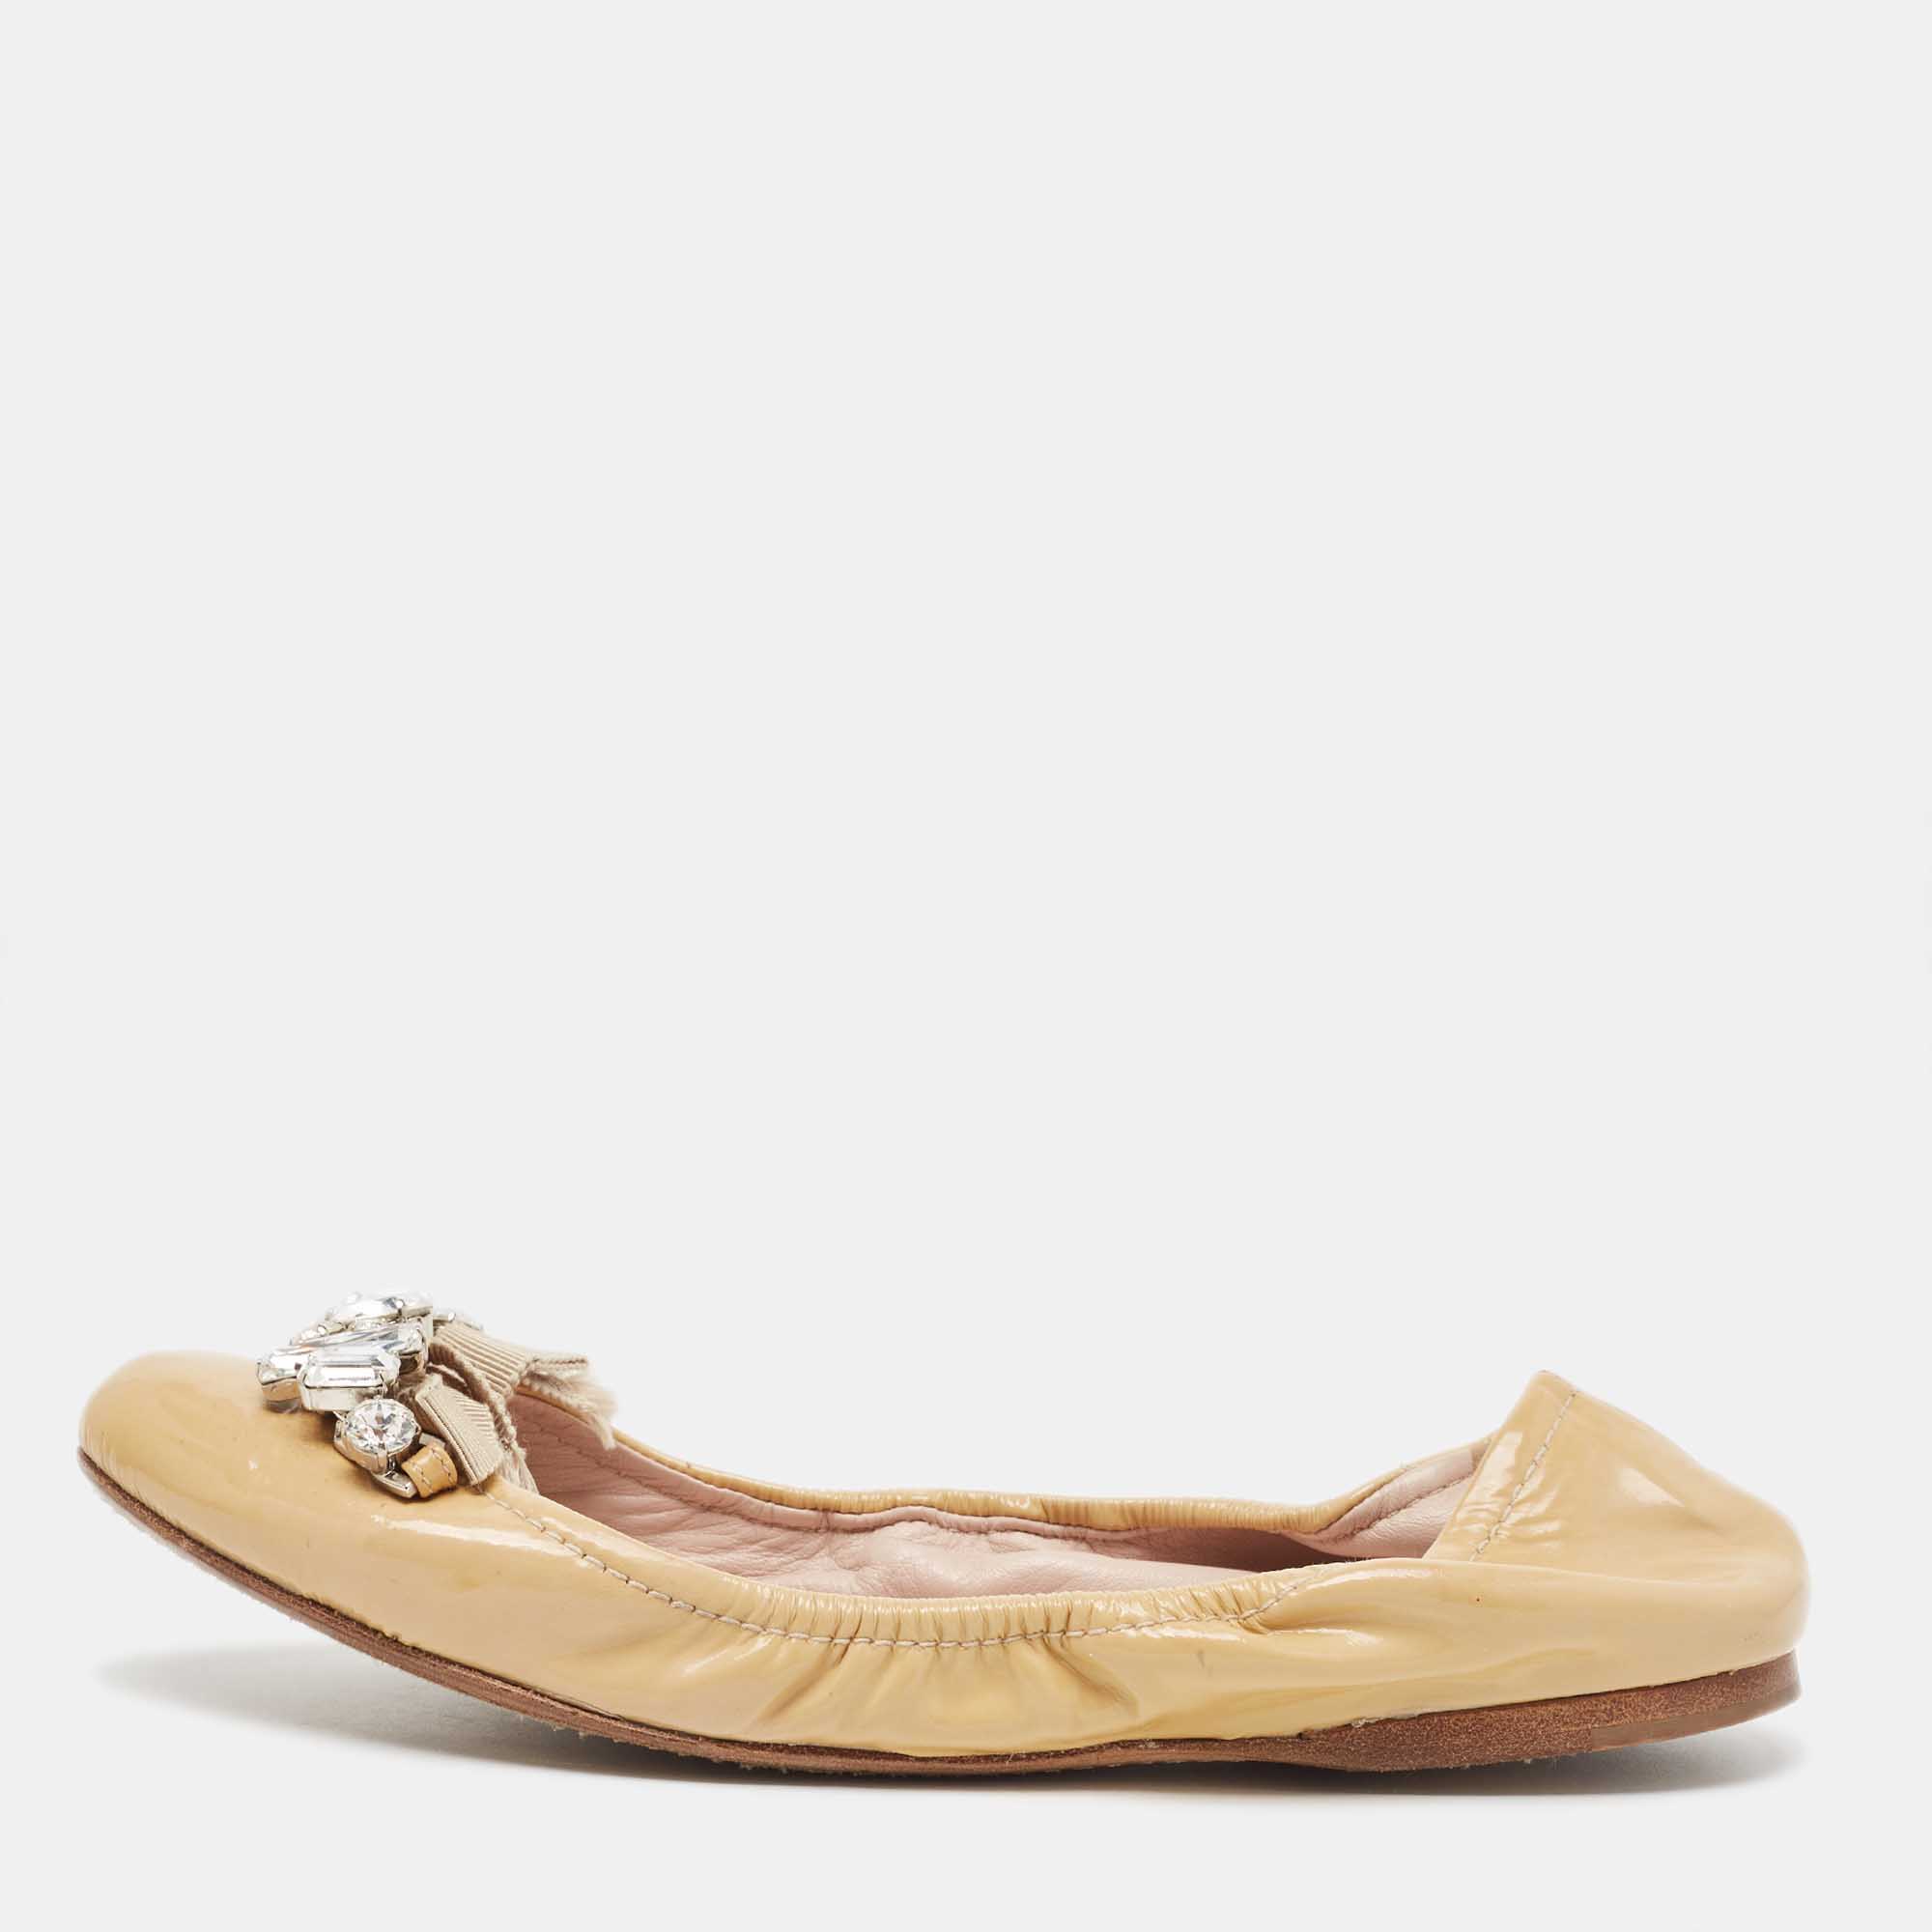 Pre-owned Miu Miu Beige Patent Leather Crystal Embellished Ballet Flats Size 39